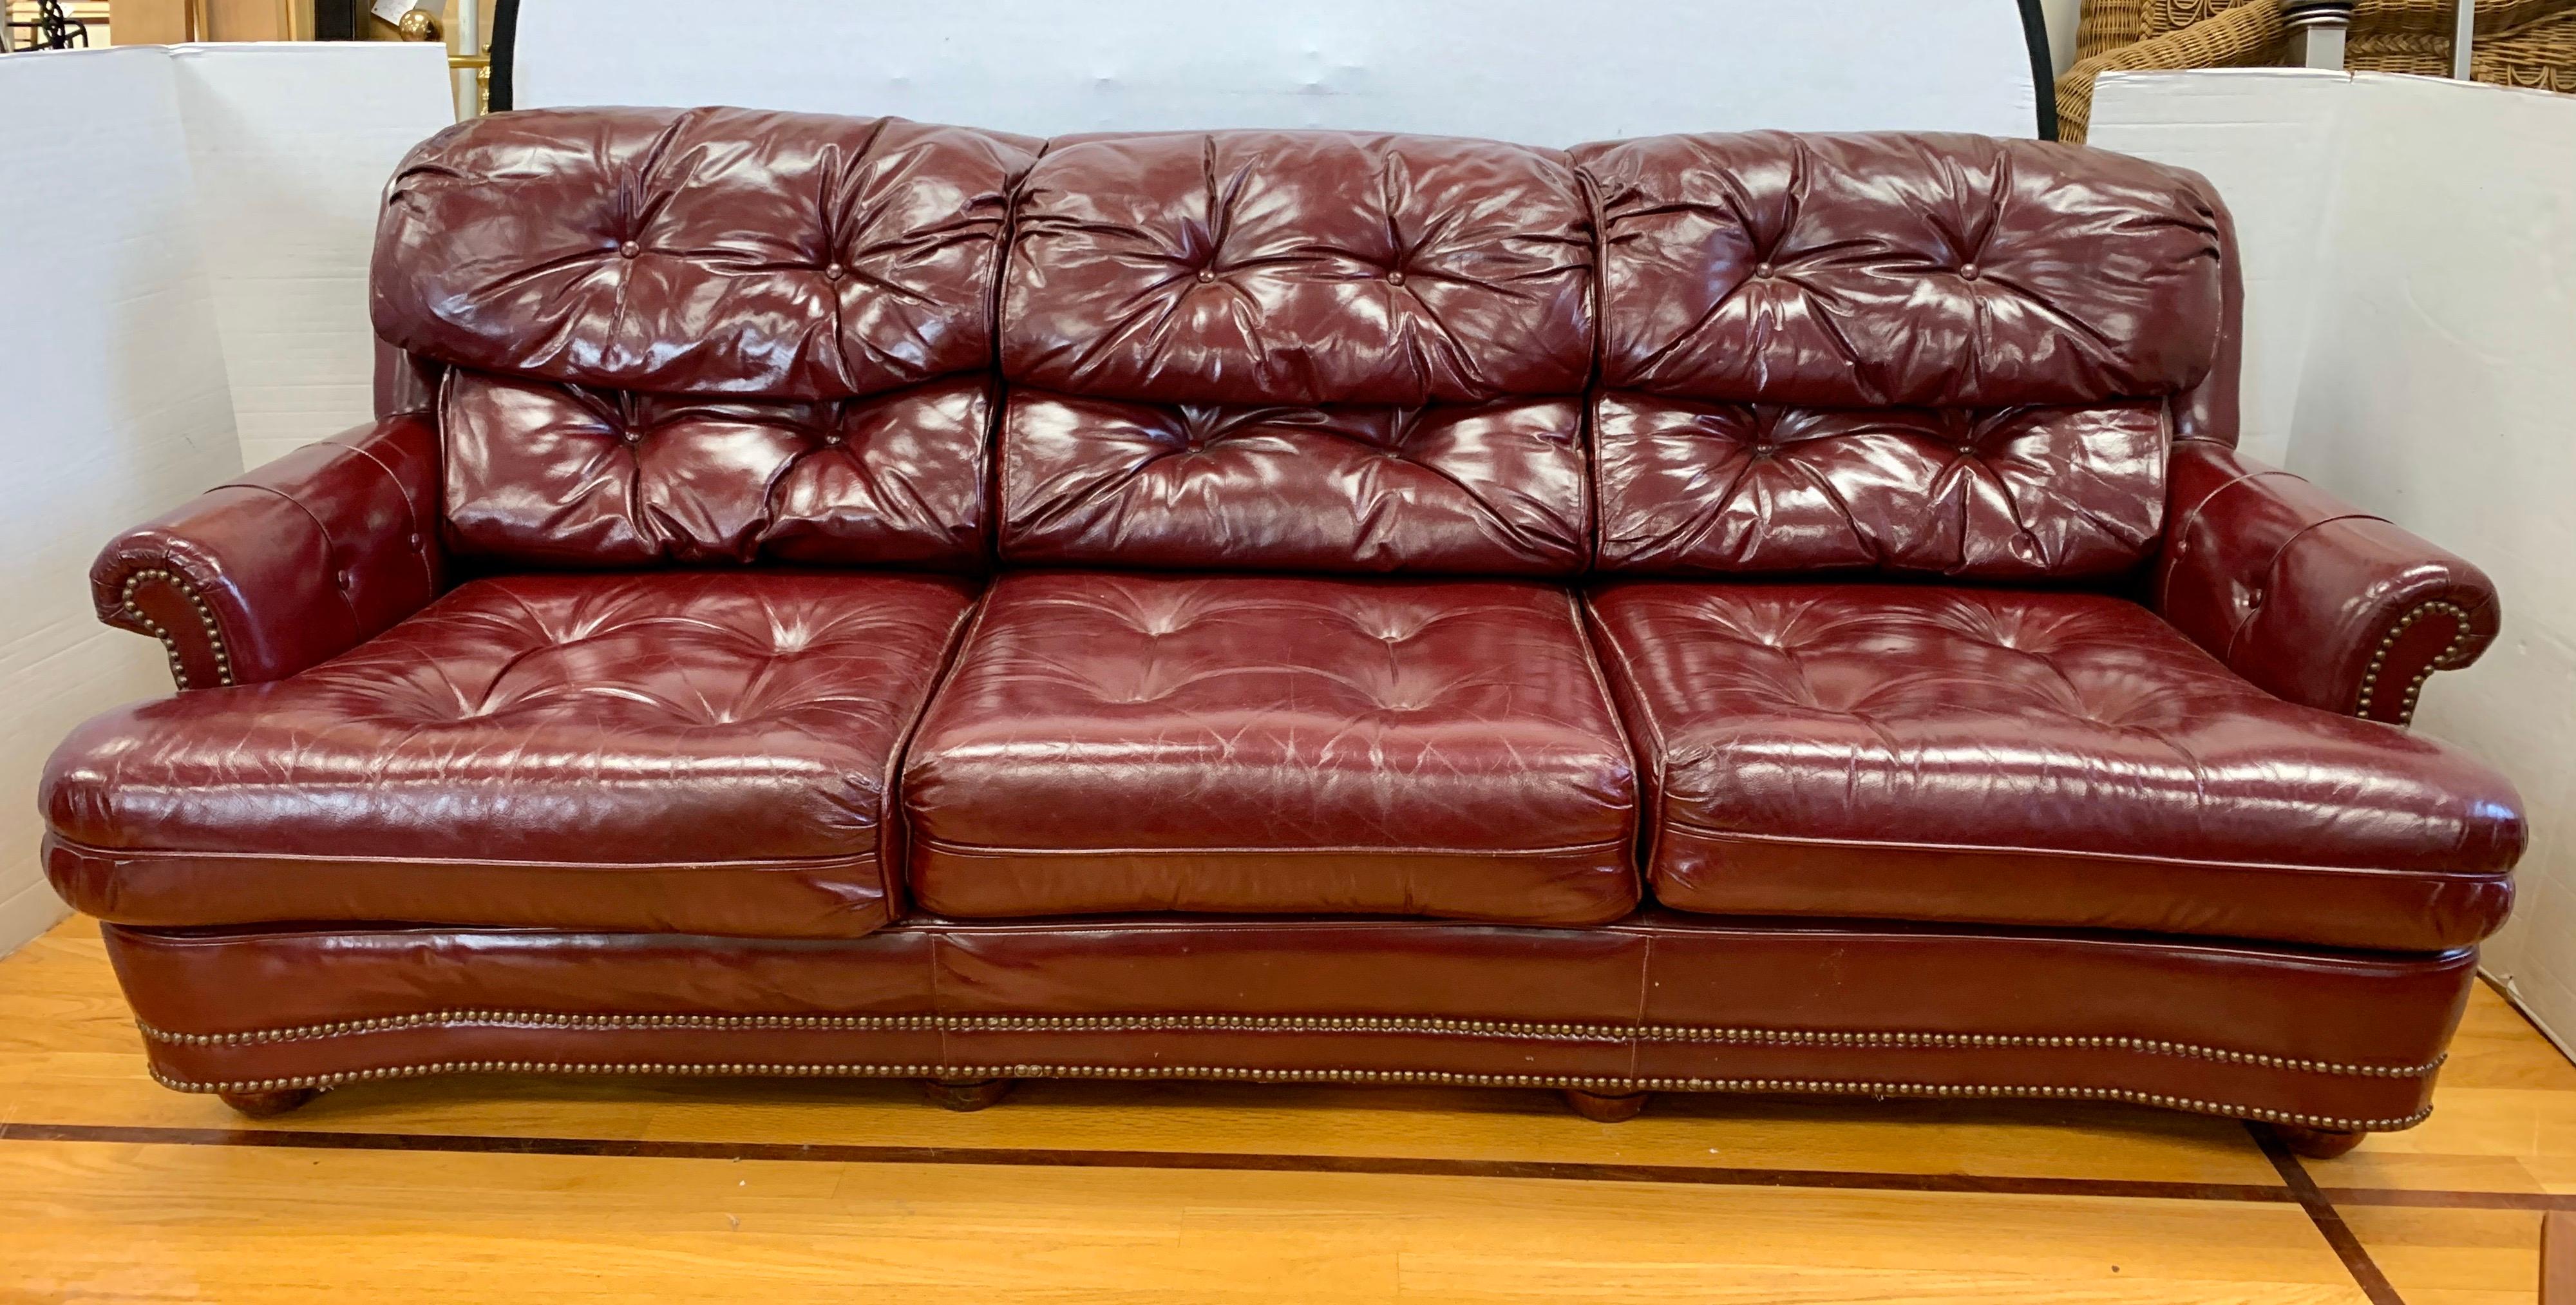 Classic leather 100% burgundy leather chesterfield sofa that measures seven feet wide.
Elegant brass nailheads run around the whole piece. One of the most comfortable sofas
you have ever sat in. The leather is broken in perfectly.